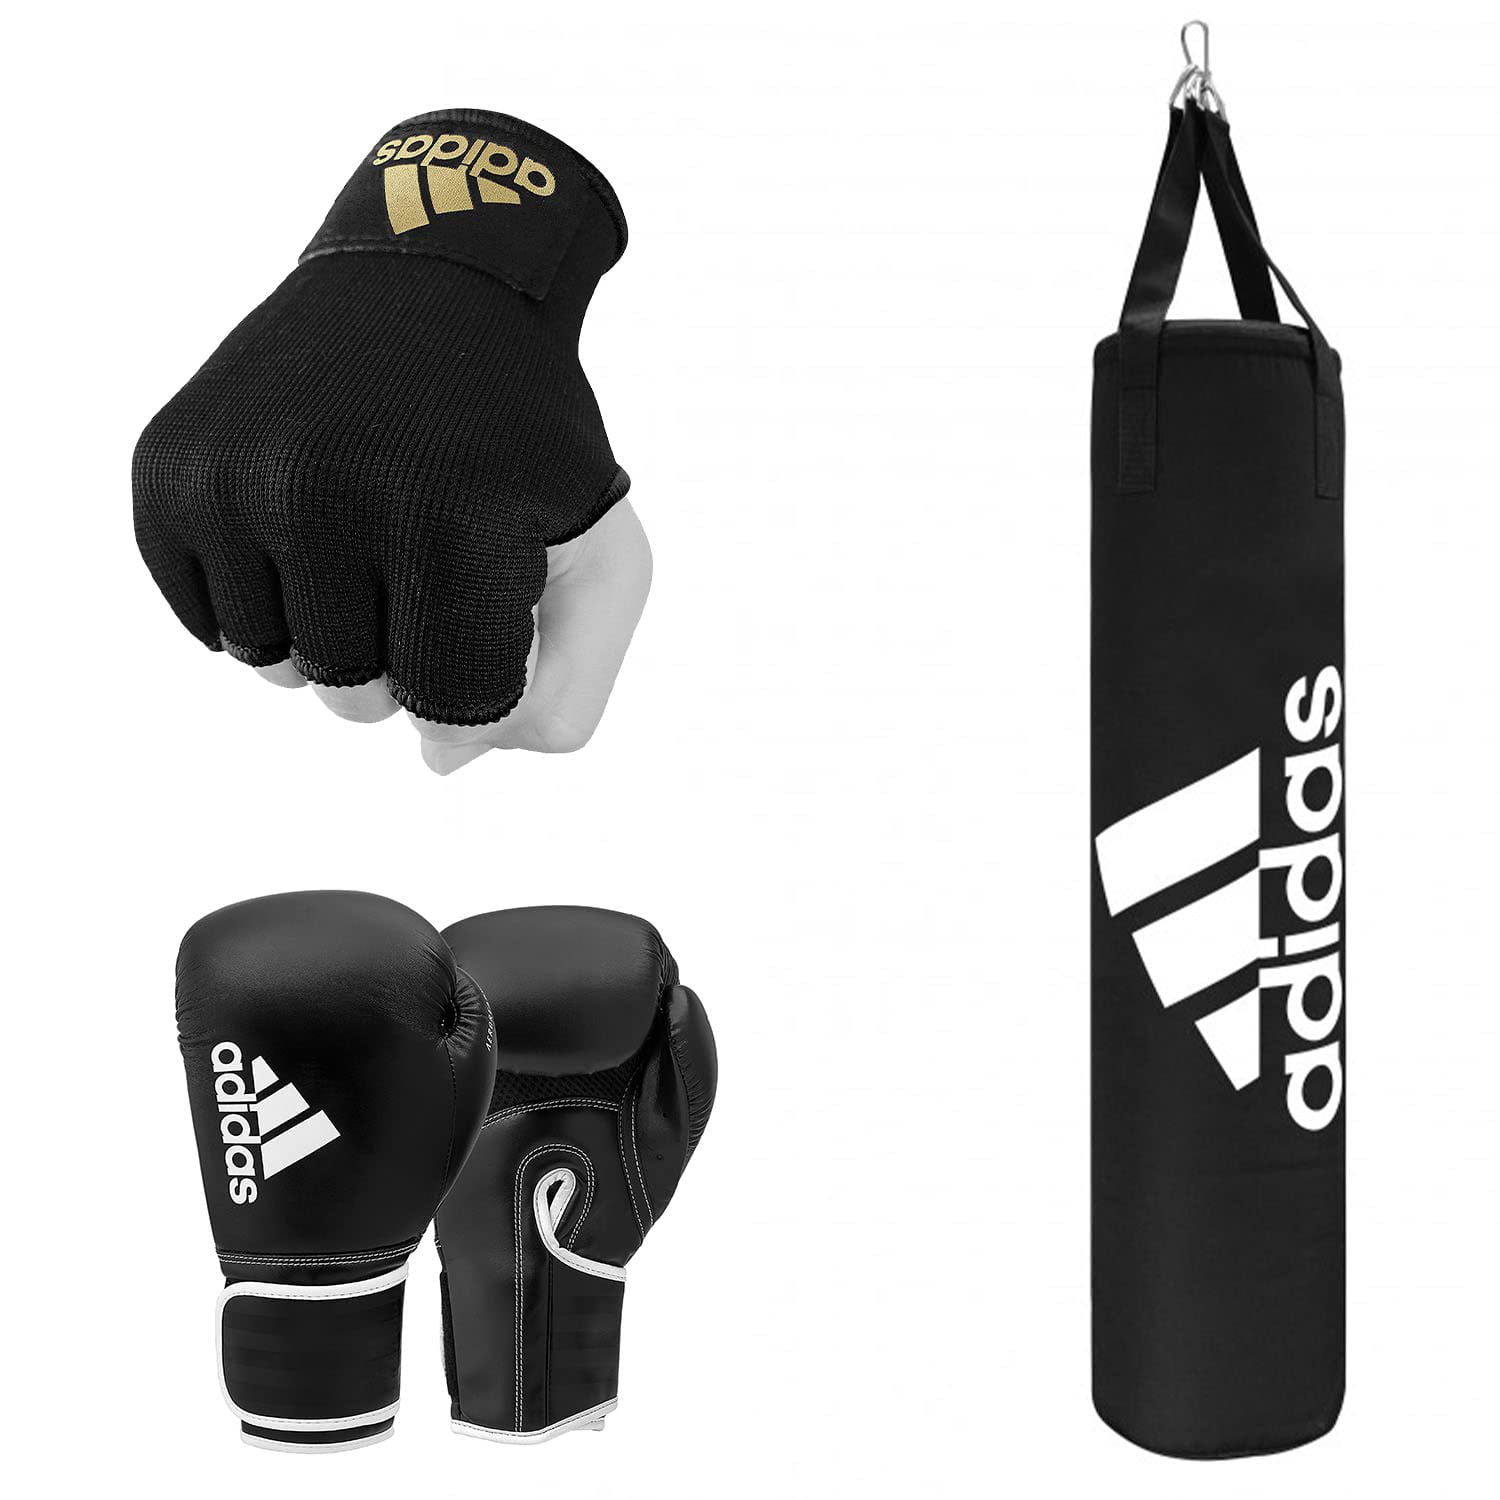 Core Fitness Punch Bag Gym Exercise Focus Pads Strength Training Boxing Gloves 